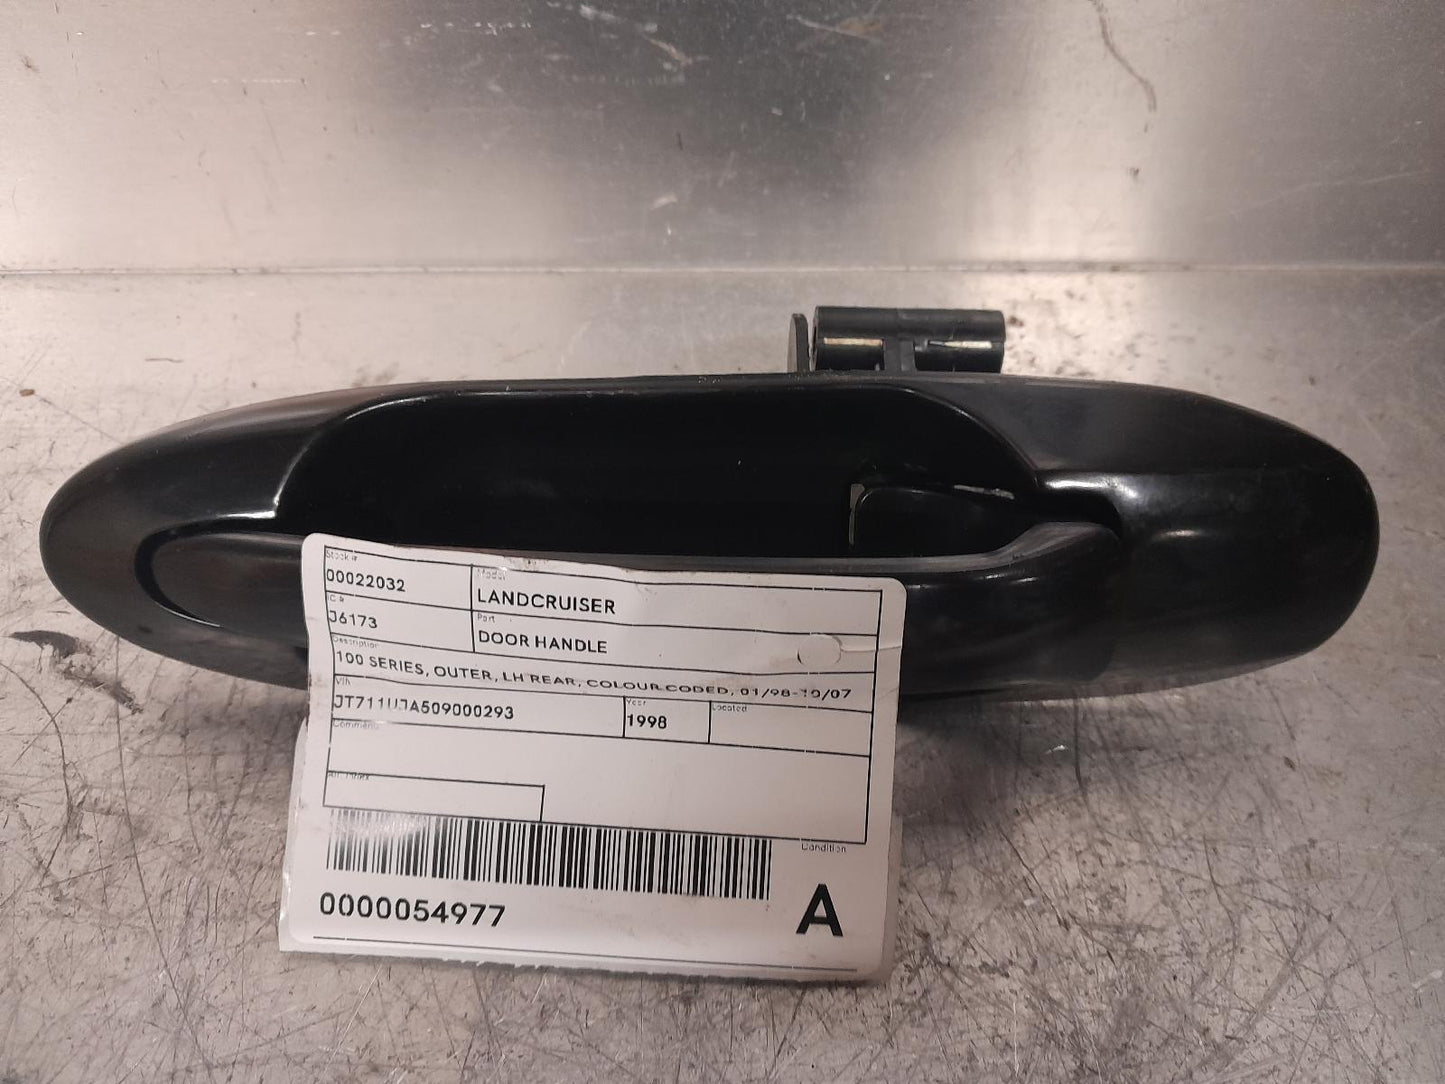 TOYOTA LANDCRUISER DOOR HANDLE 100 SERIES, OUTER, LH REAR, COLOUR CODED, 01/98-10/07